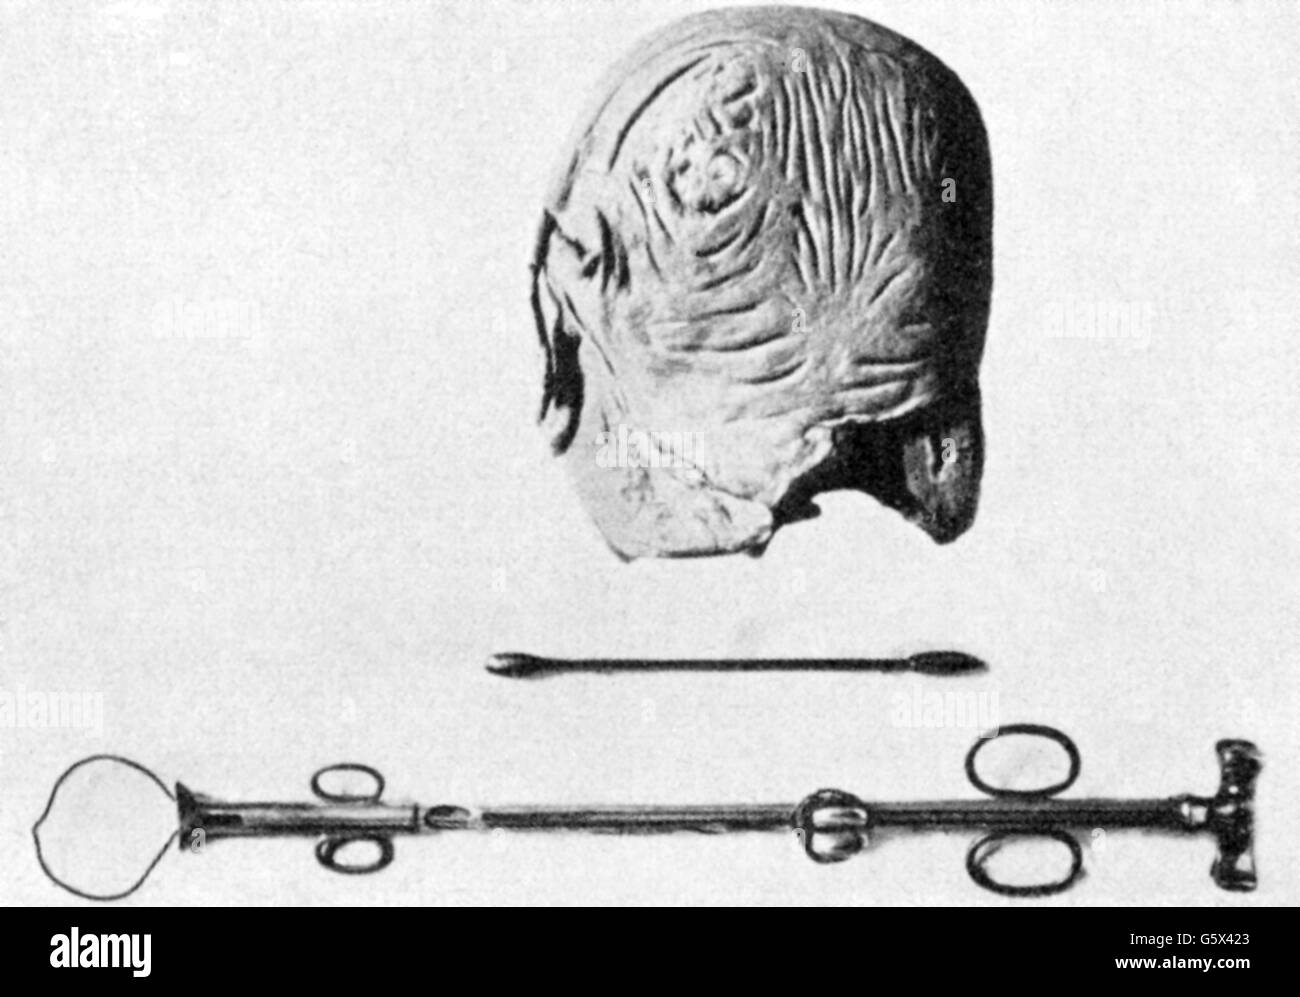 Porro, Edoardo, 17.10.1842 - 18.7.1902, Italian physician / medical doctor, womb amputeed by him during surgery 1876 and medical instruments, museum of the gynaecological clinic, Pavia, Stock Photo